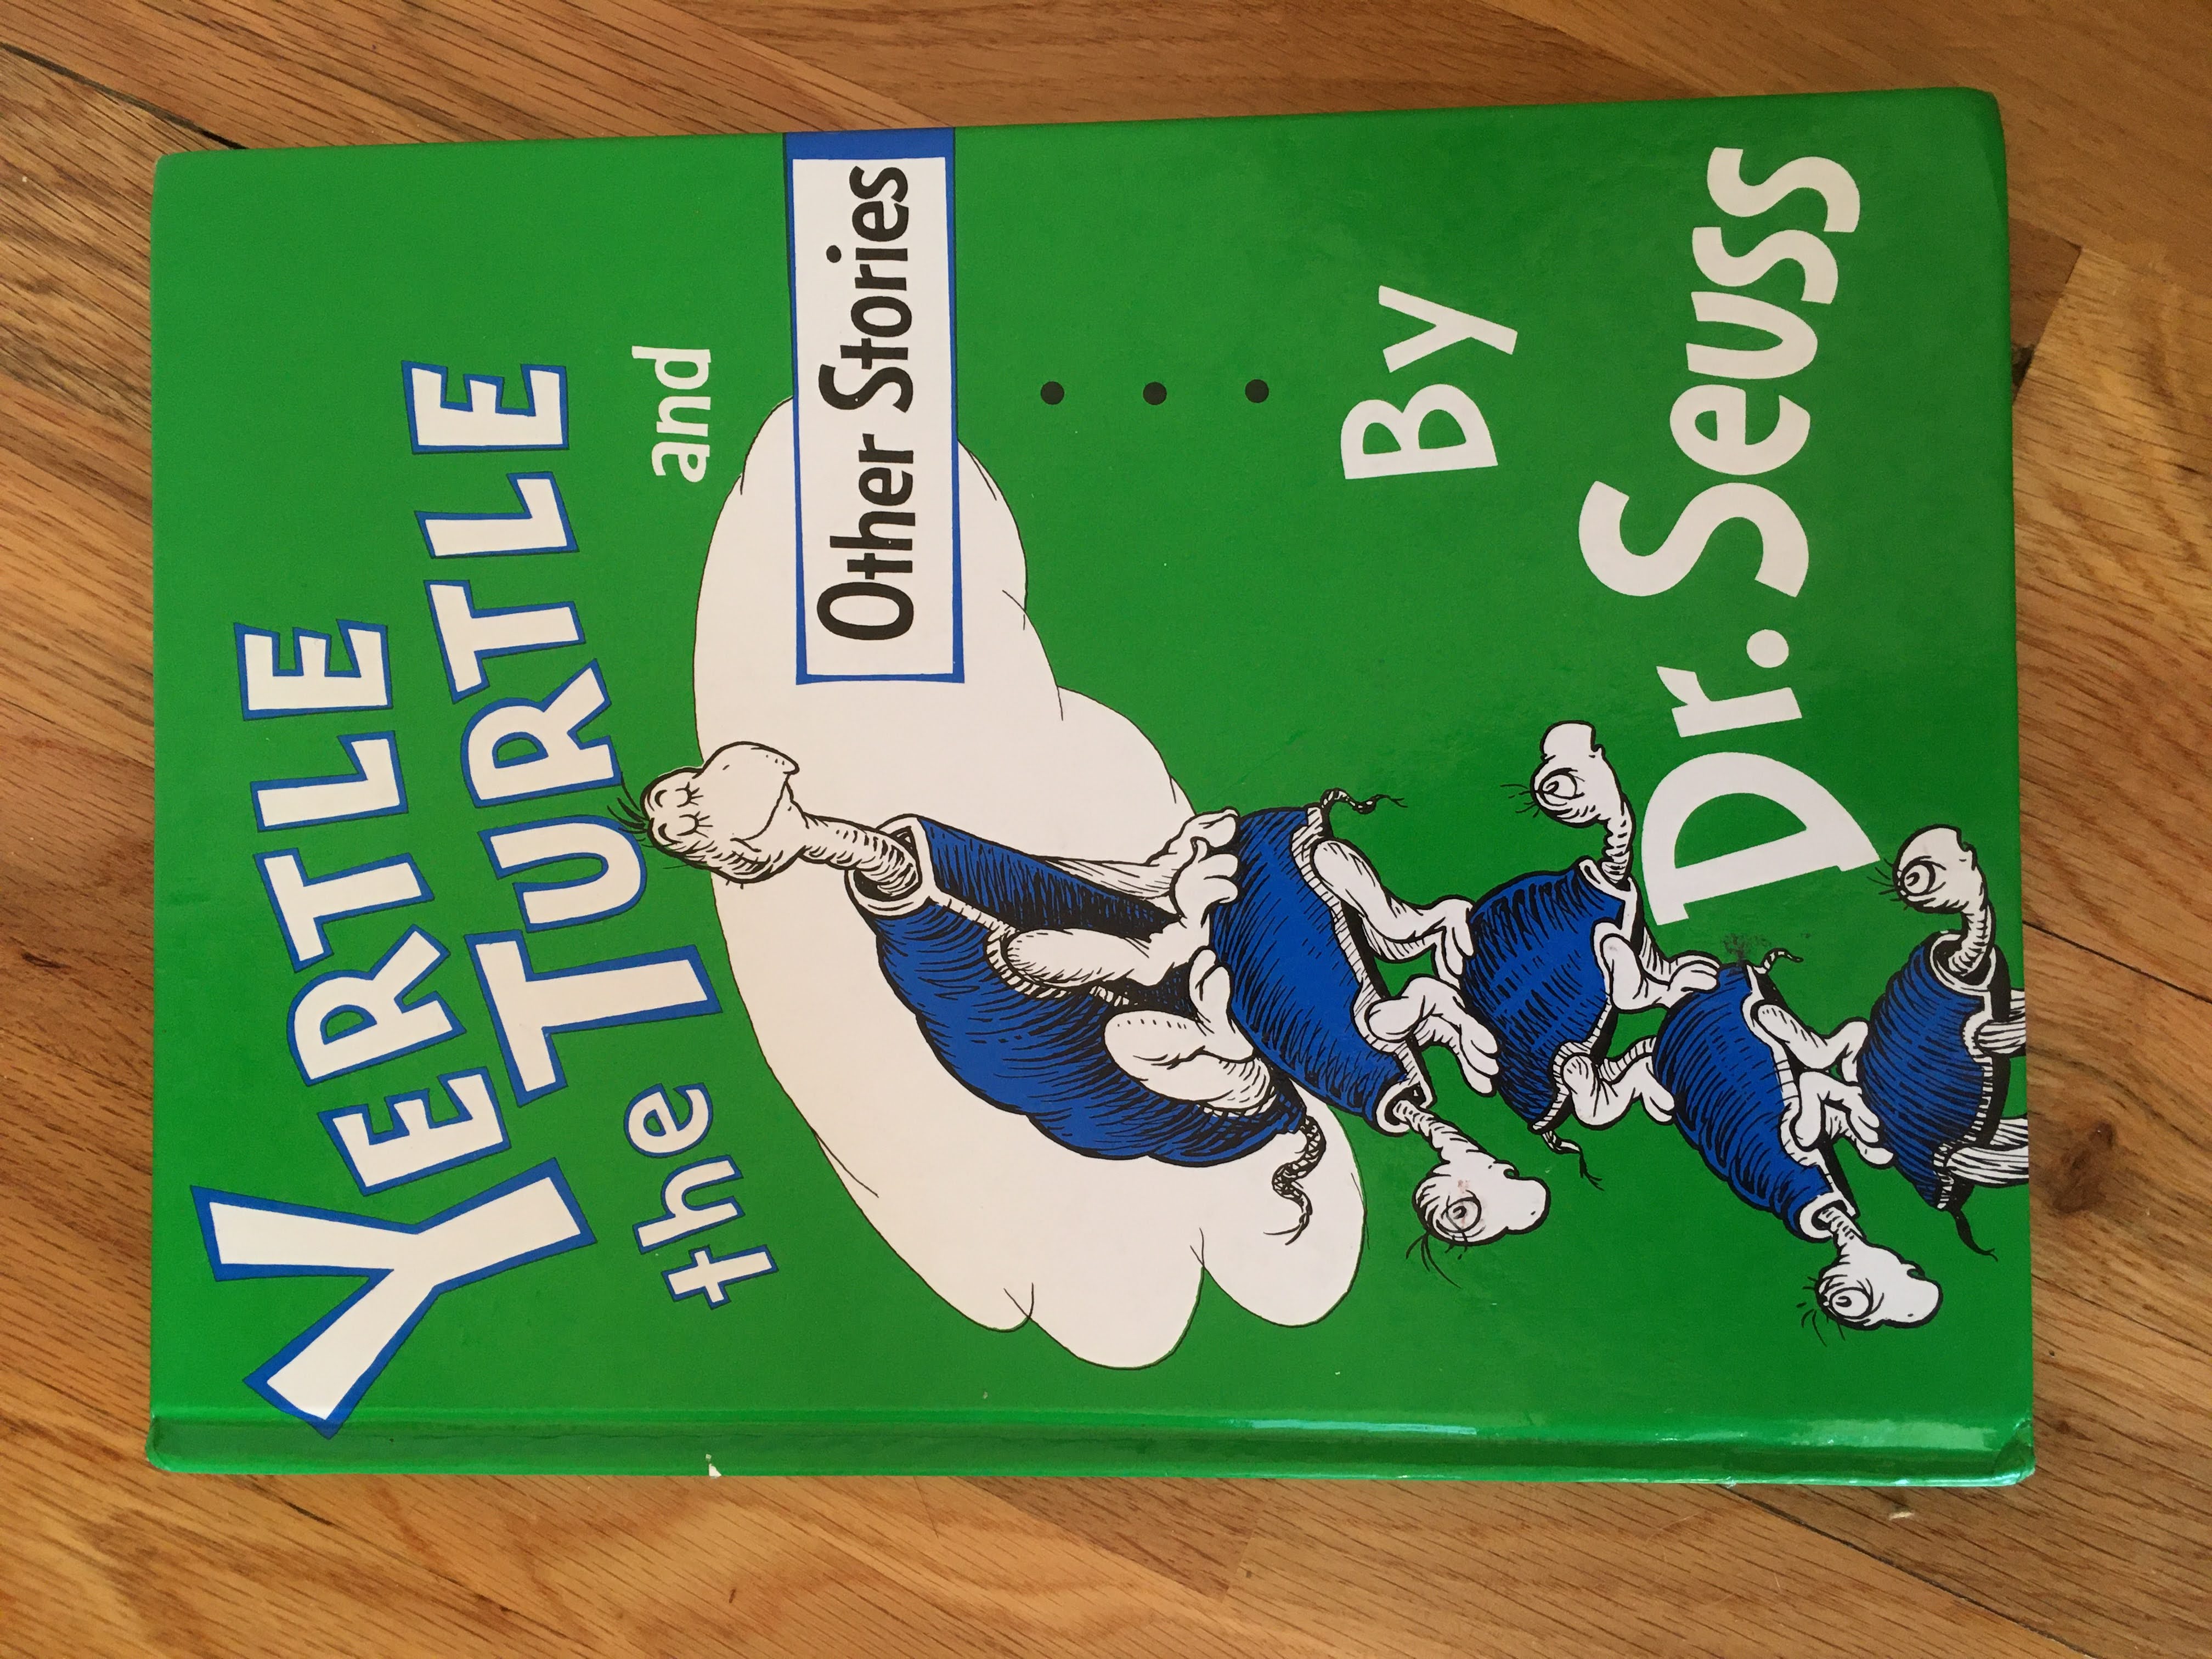 yertle cover